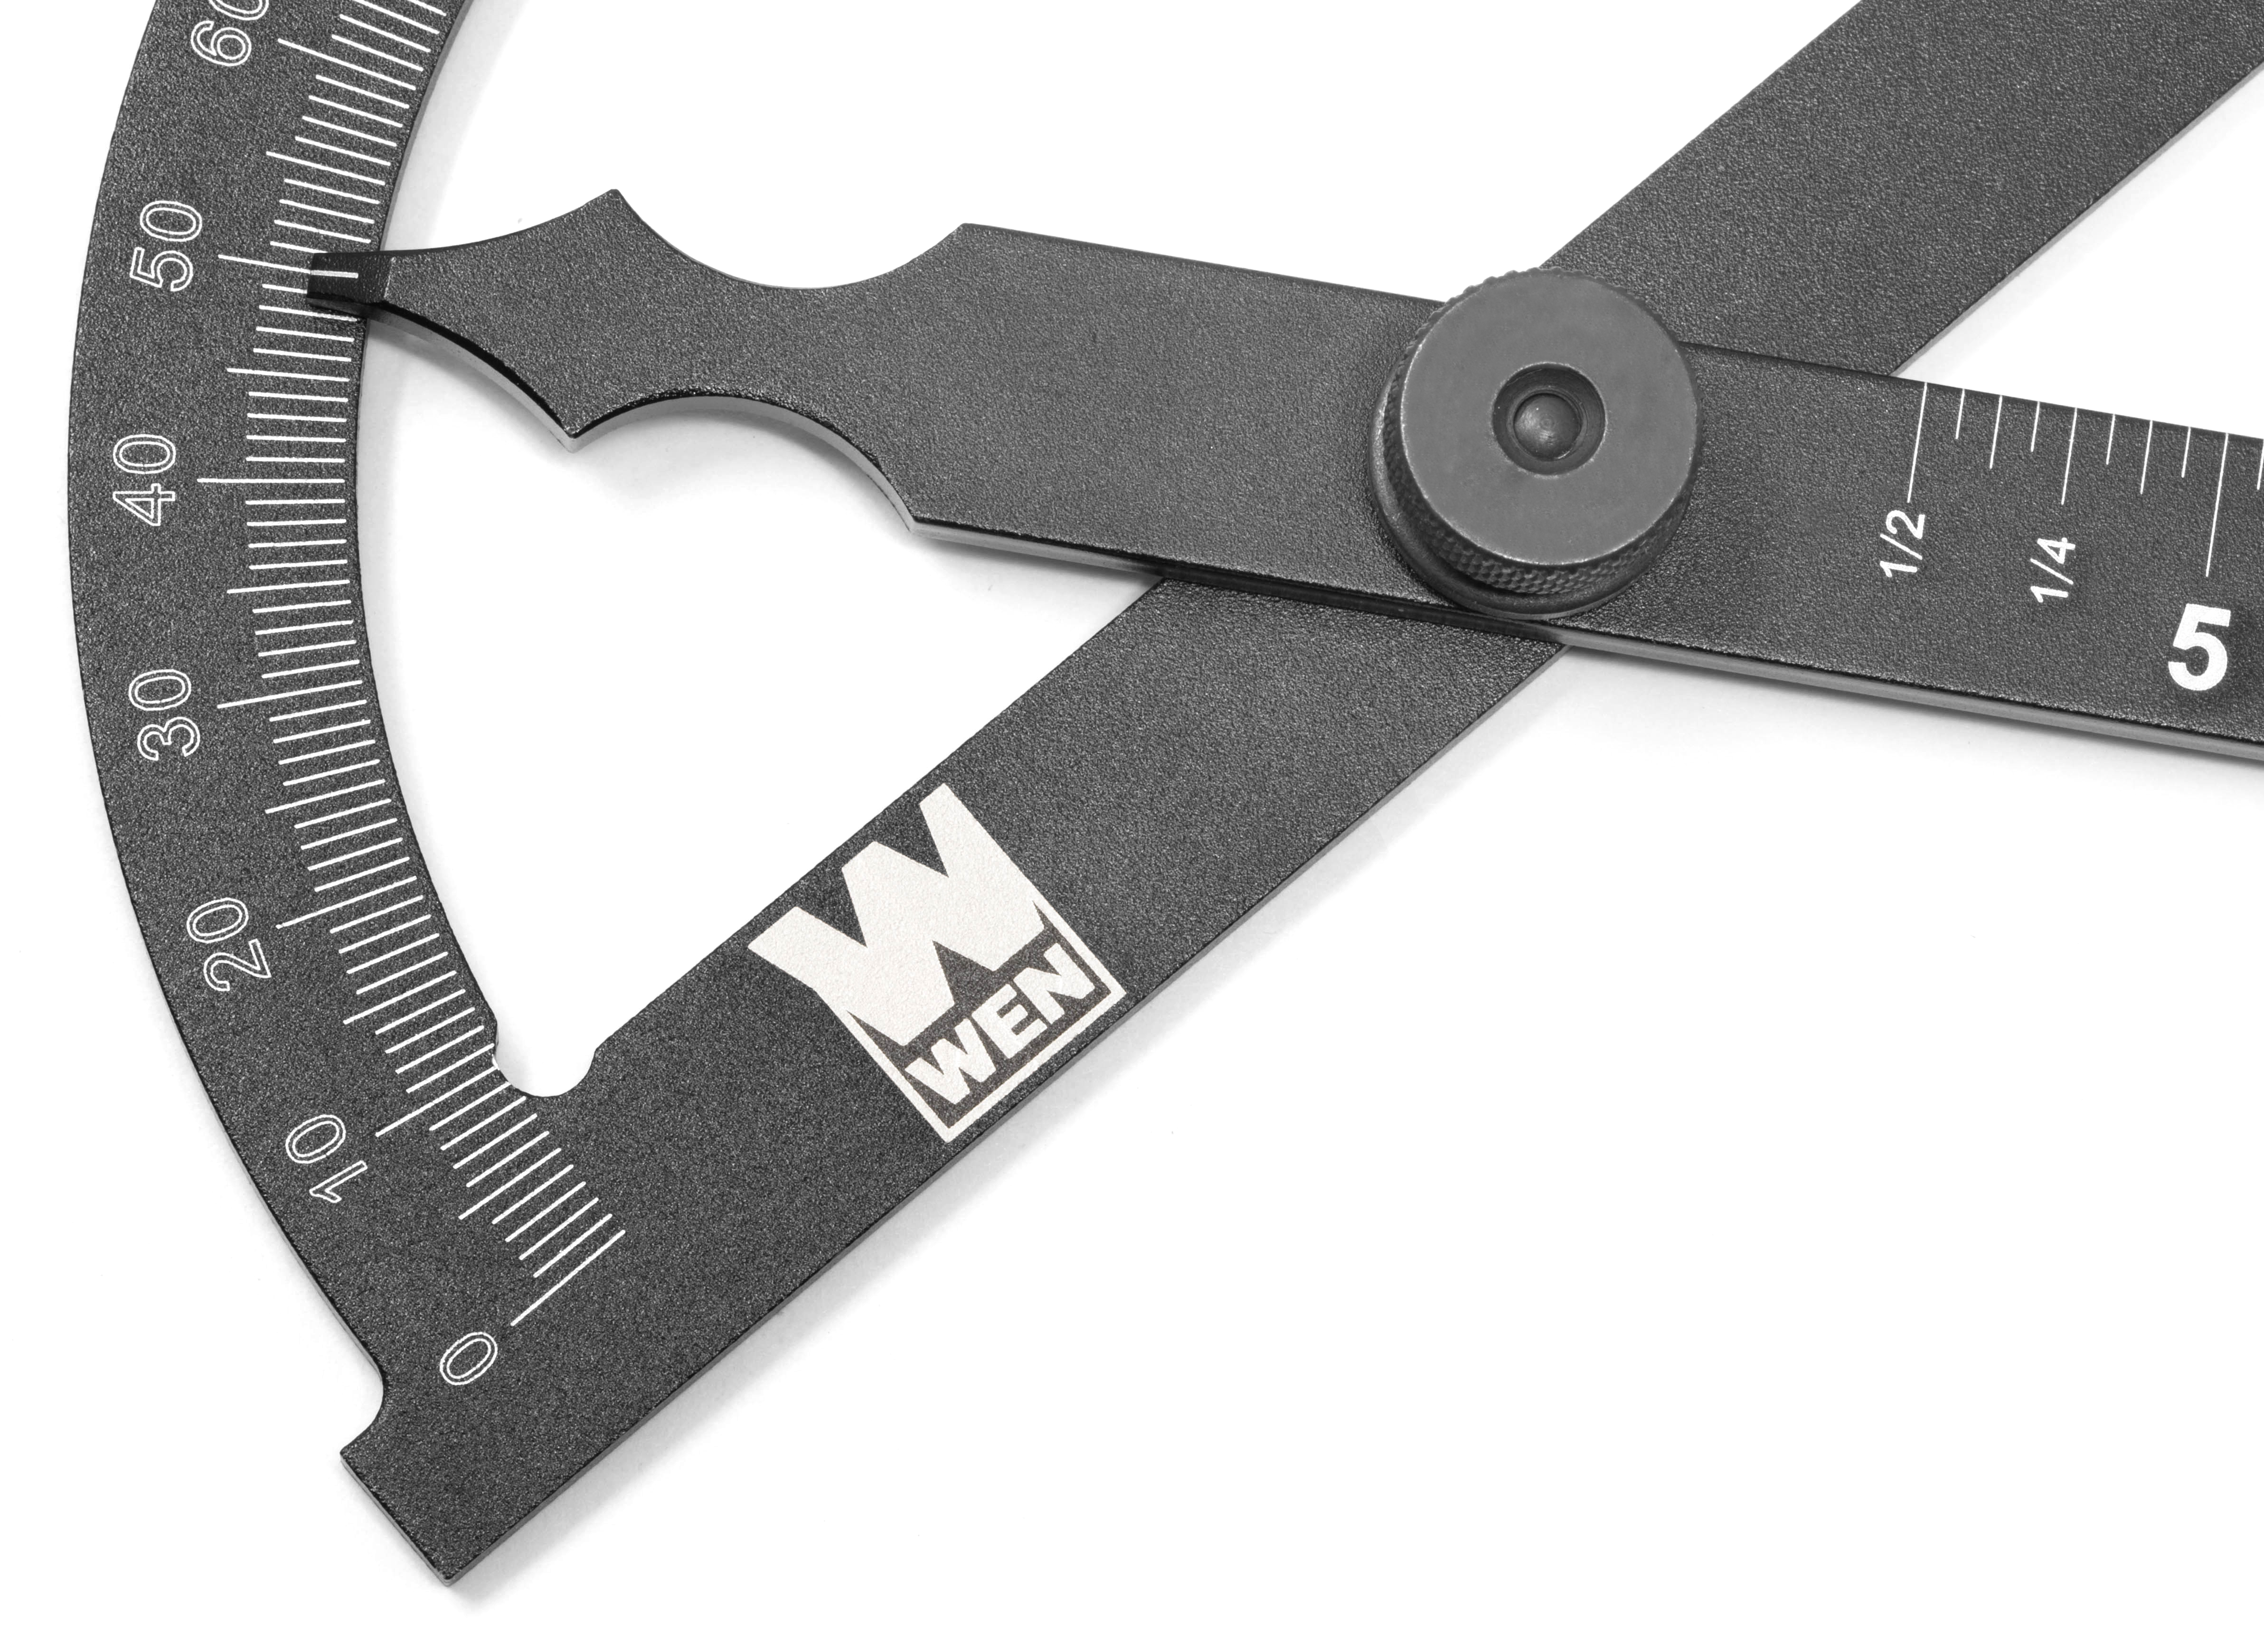 WEN Adjustable Aluminum Protractor and Angle Gauge with Laser Etched Scale - image 4 of 5